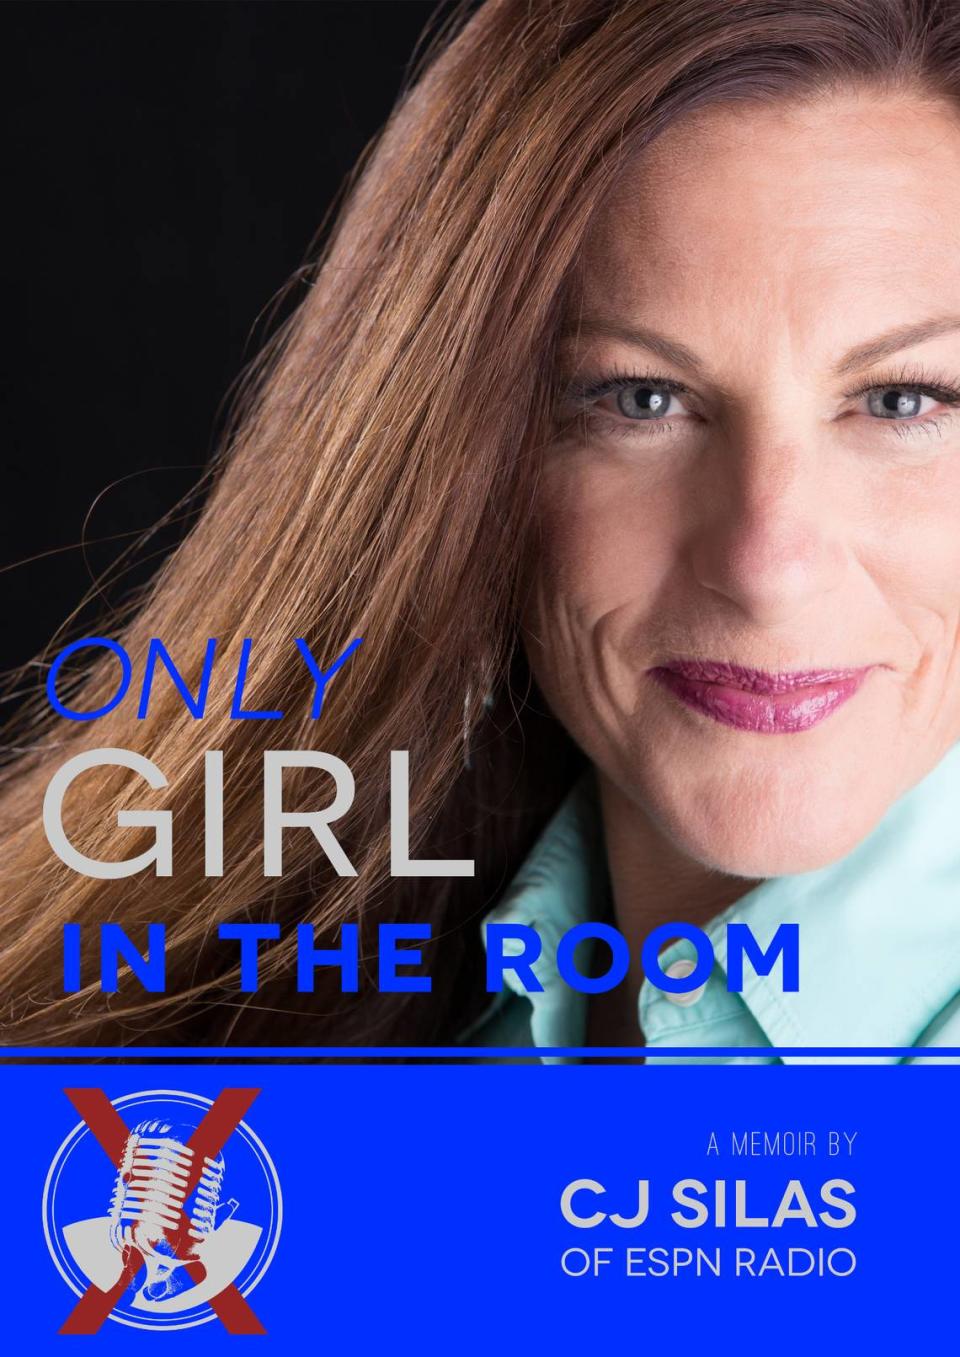 C.J. wrote the memoir “Only Girl in the Room” on her career as a woman in sports media.